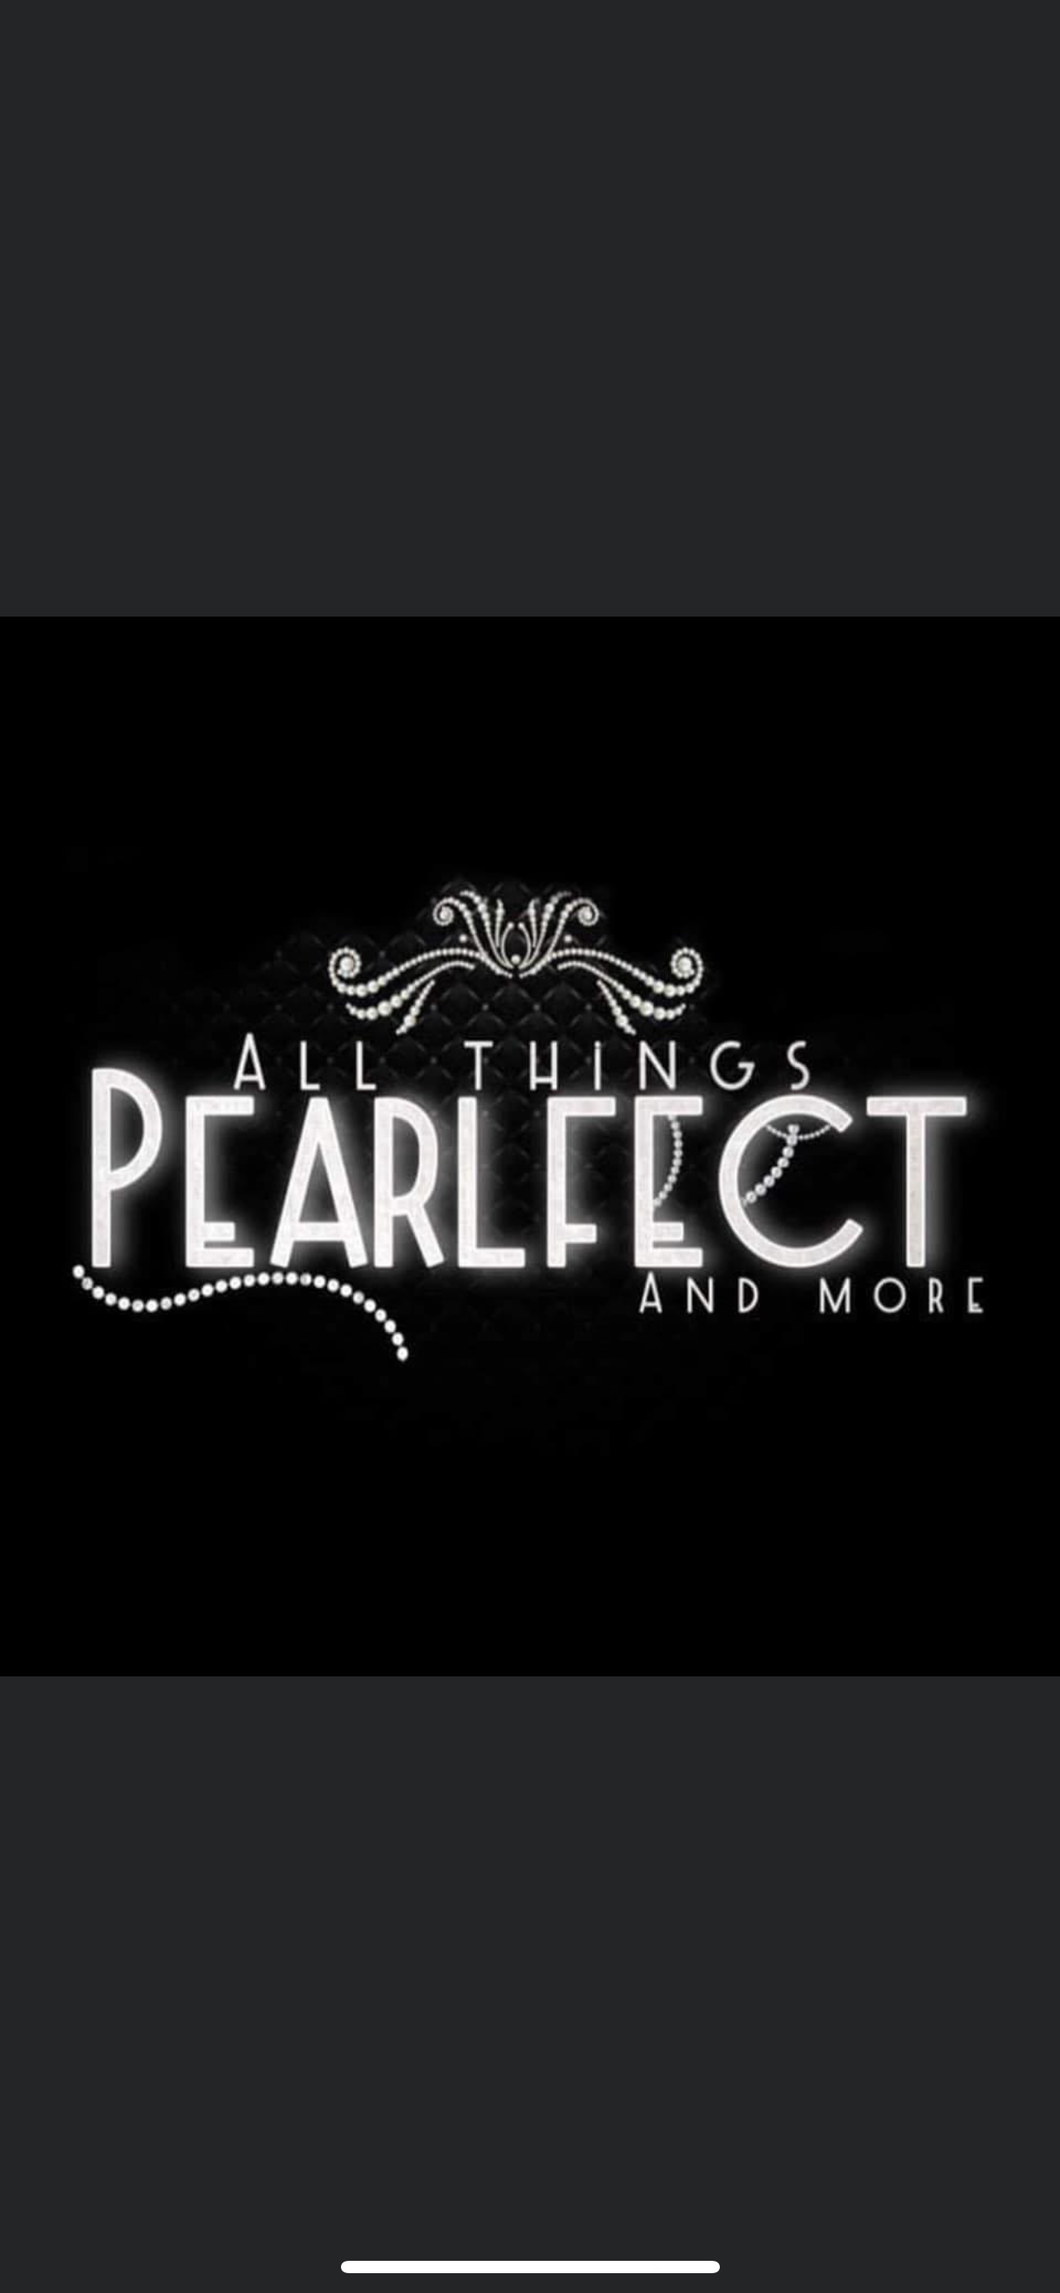 All Things Pearlfect Gift Card!